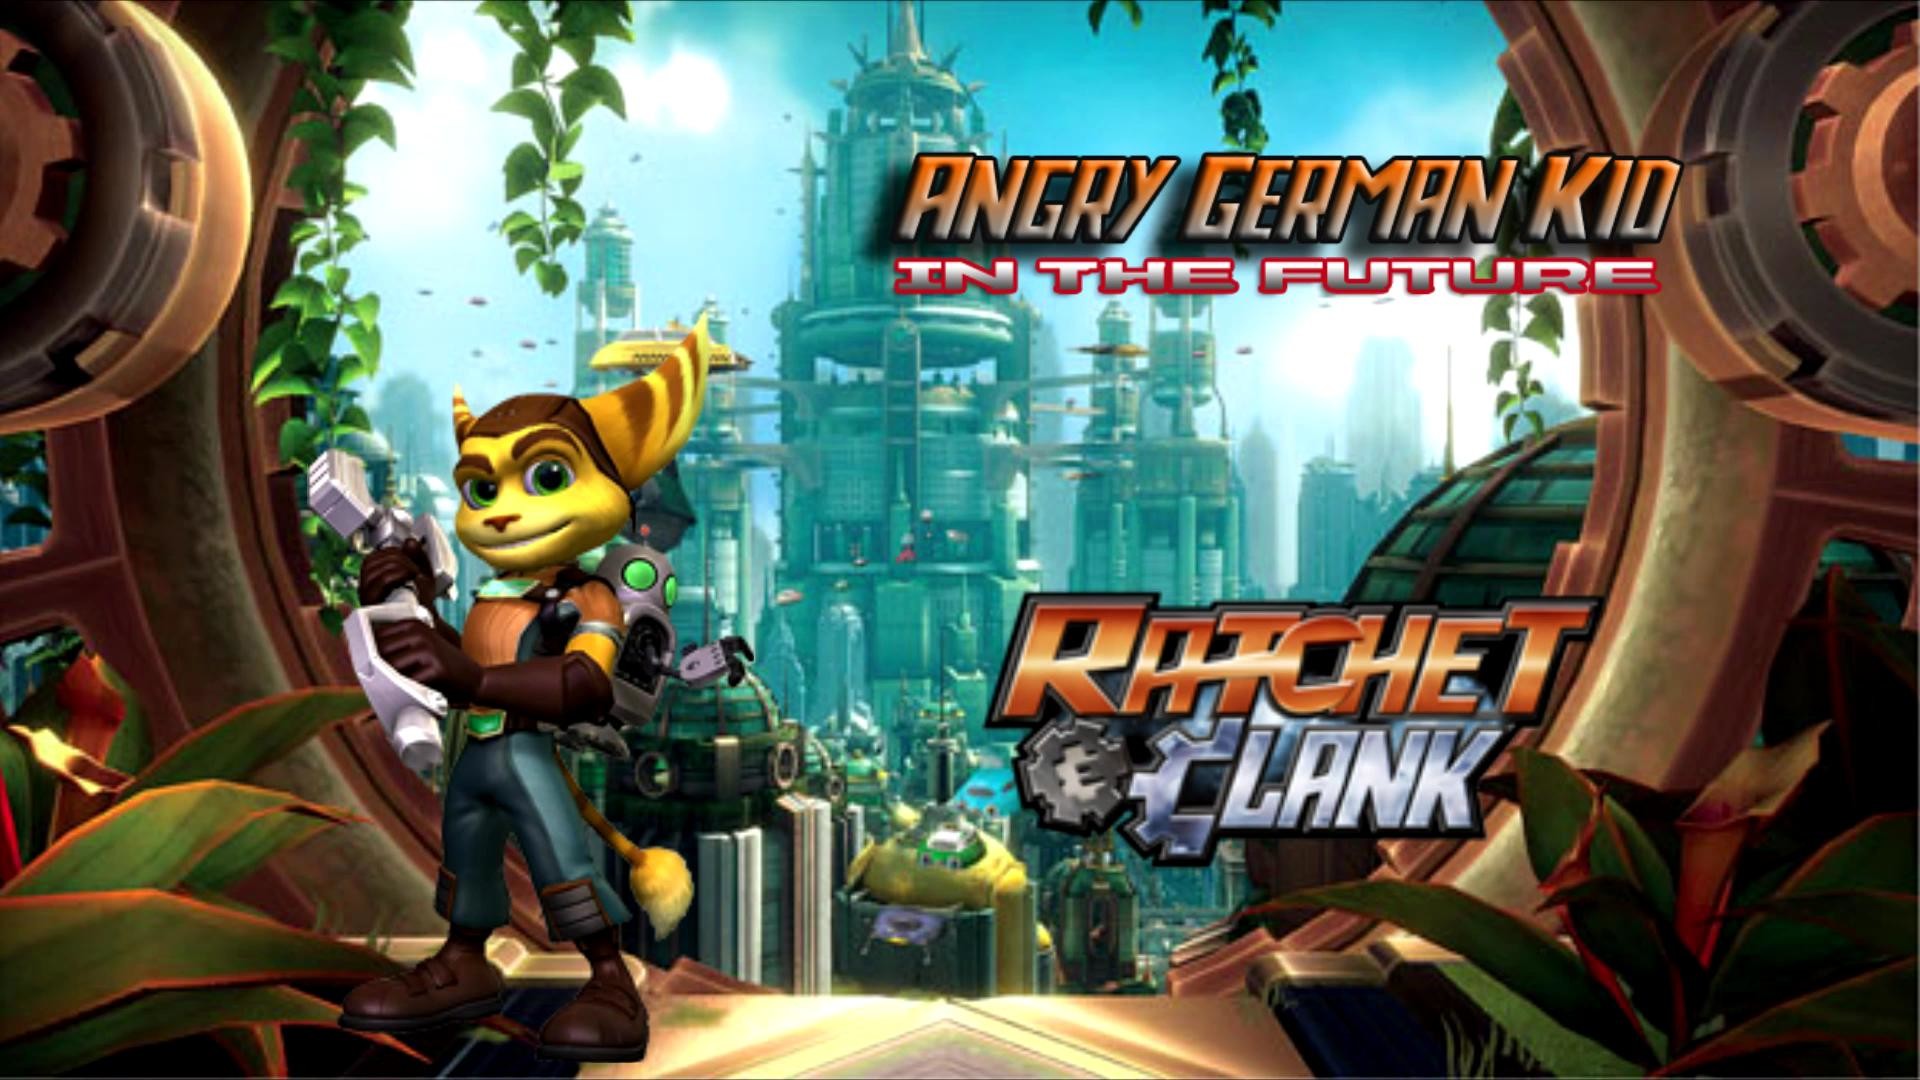 1920x1080 Image - Ratchet and Clank Wallpaper.jpg | Angry German Kid Wiki | FANDOM  powered by Wikia